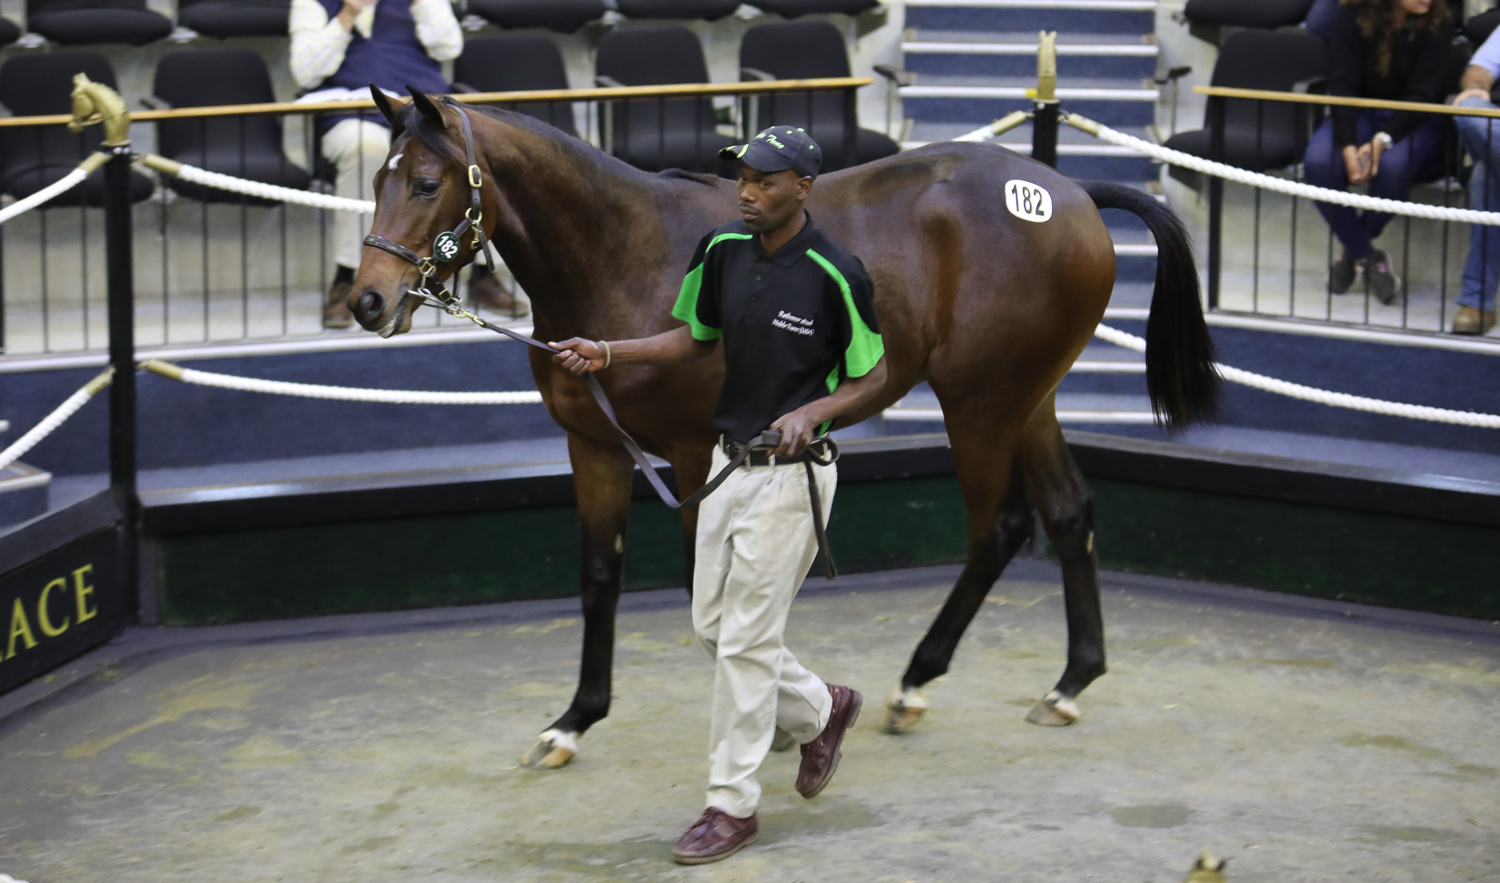 Rathmor's colt by Frankel out of a half-sister to Mastercraftsman sold for R1,2-million to Bass Racing, Image: Candiese Marnewick